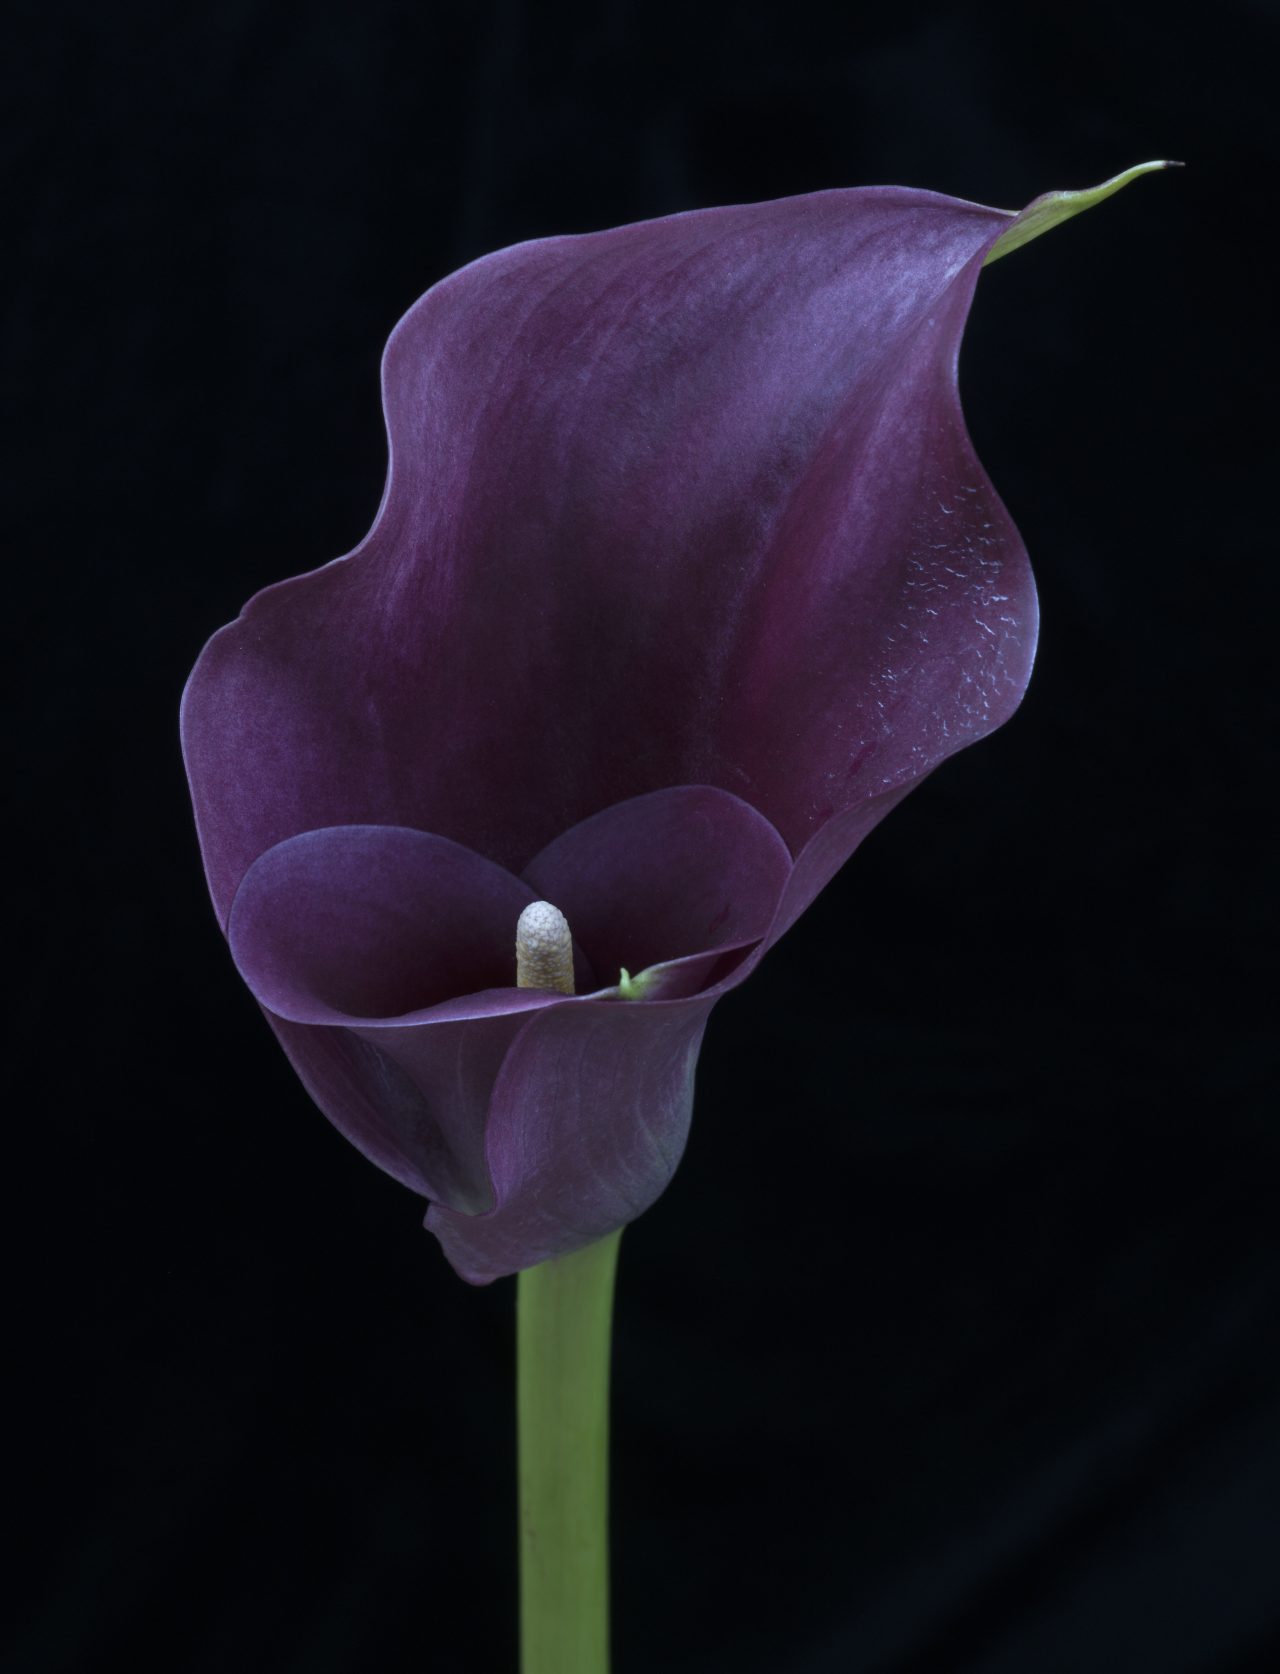 Image of a purple lily